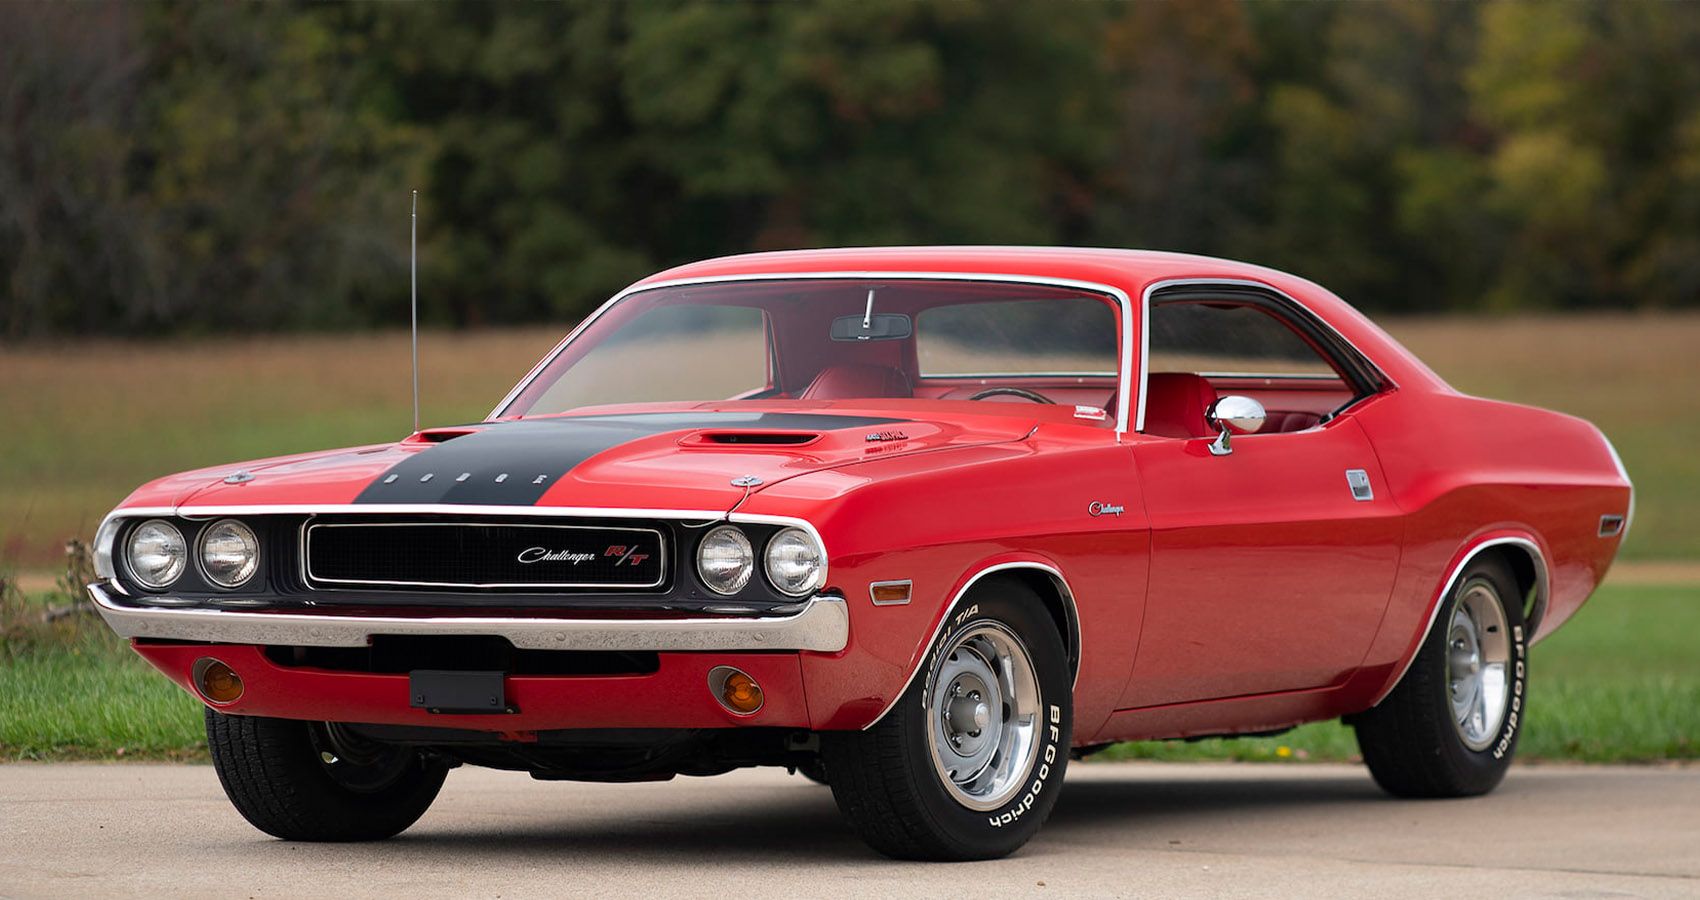 1970 Dodge Challenger R:T in red